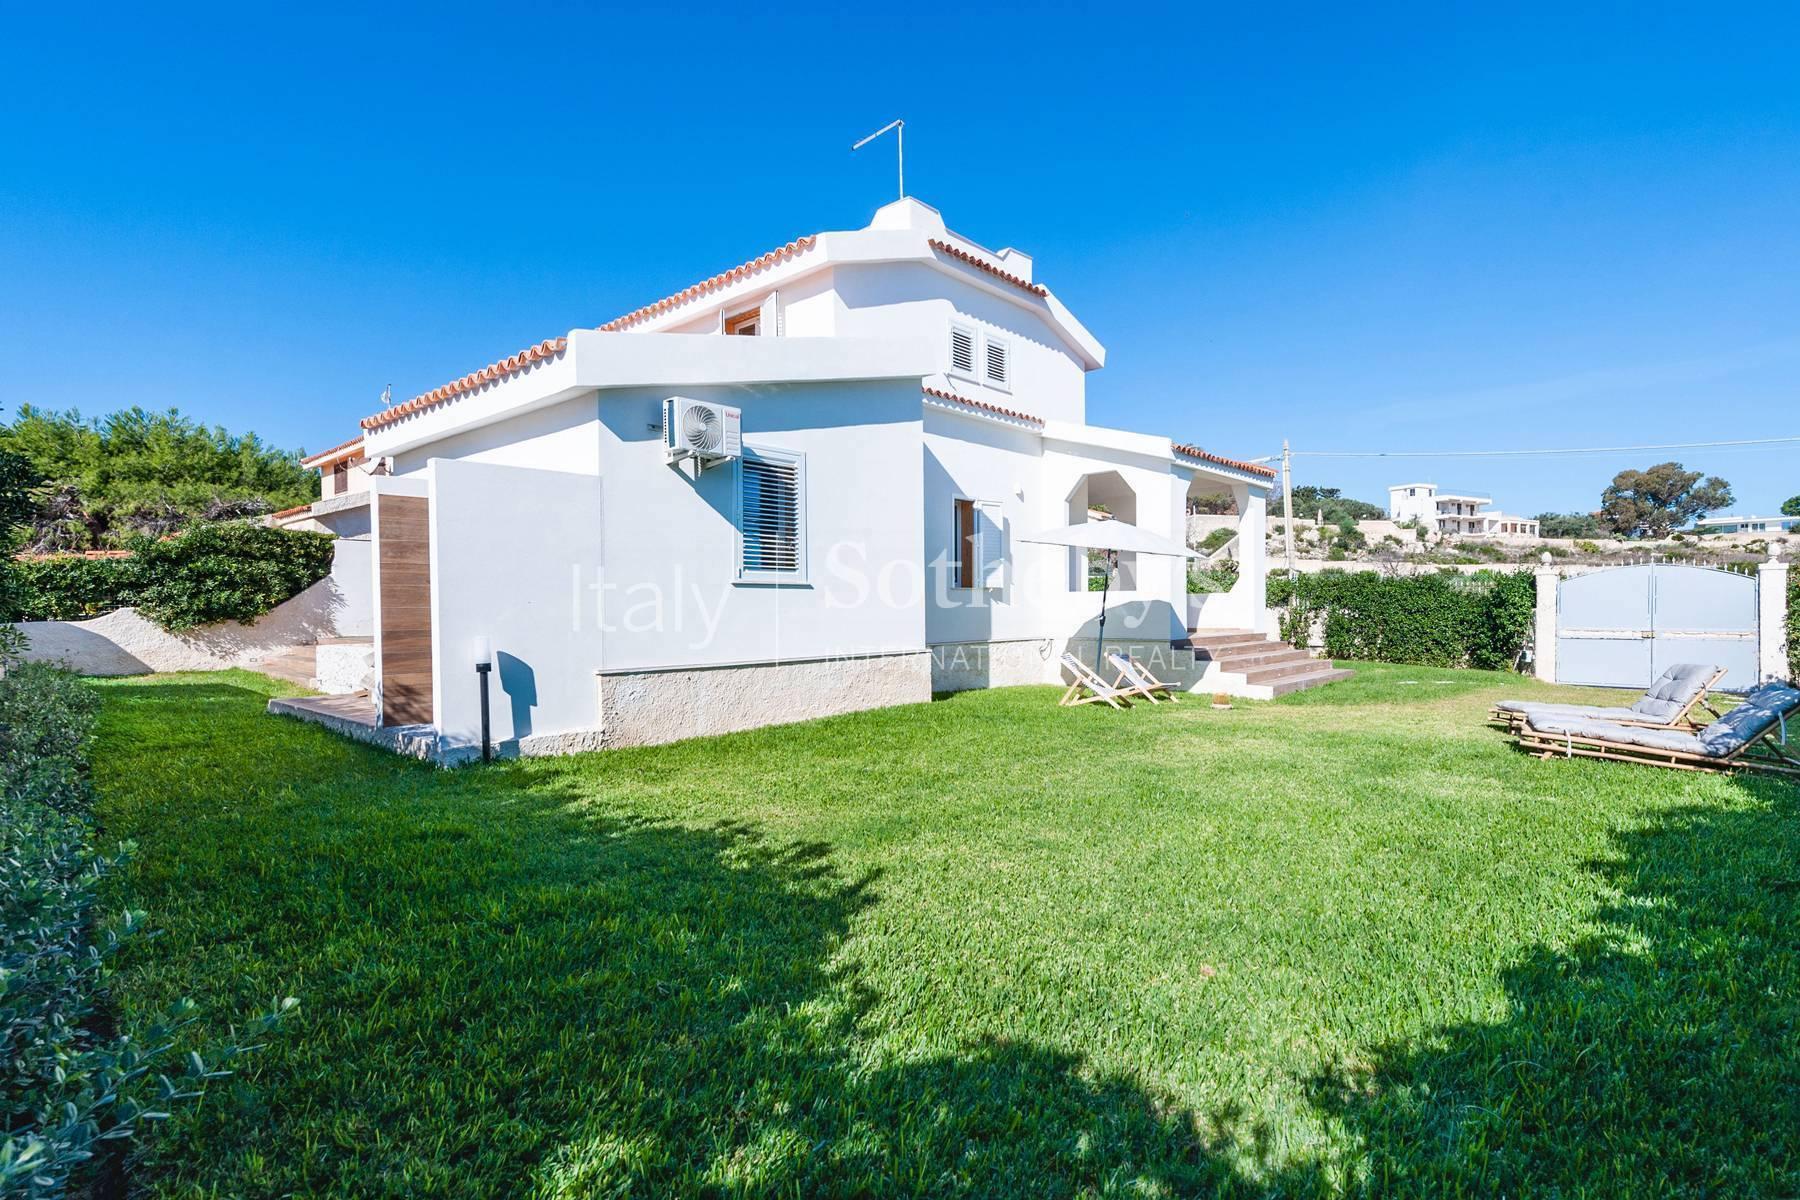 Villa in Plemmirio with direct access to the sea - 4